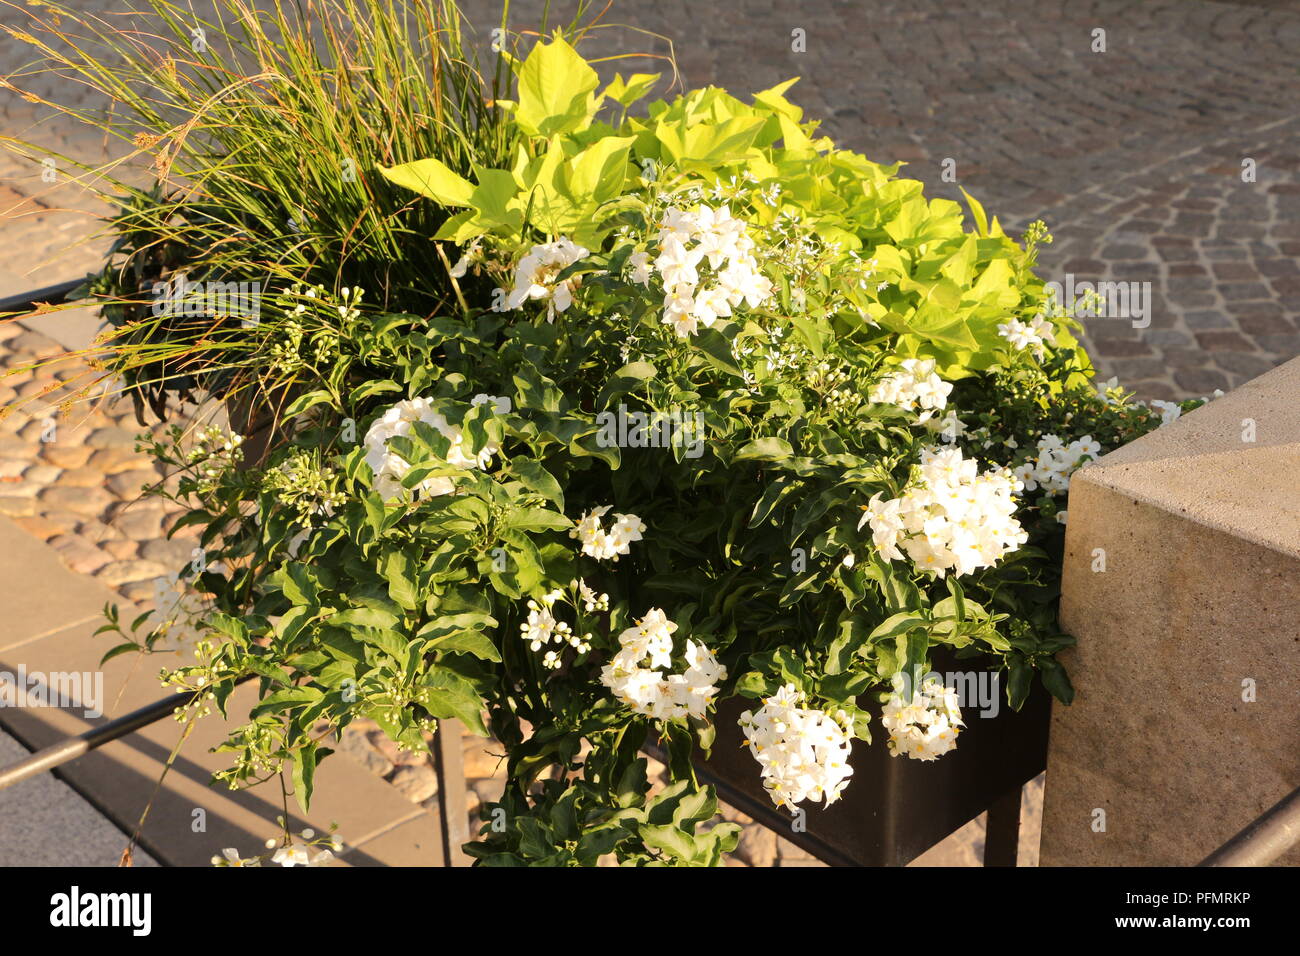 Page 2 - Blumenkästen High Resolution Stock Photography and Images - Alamy